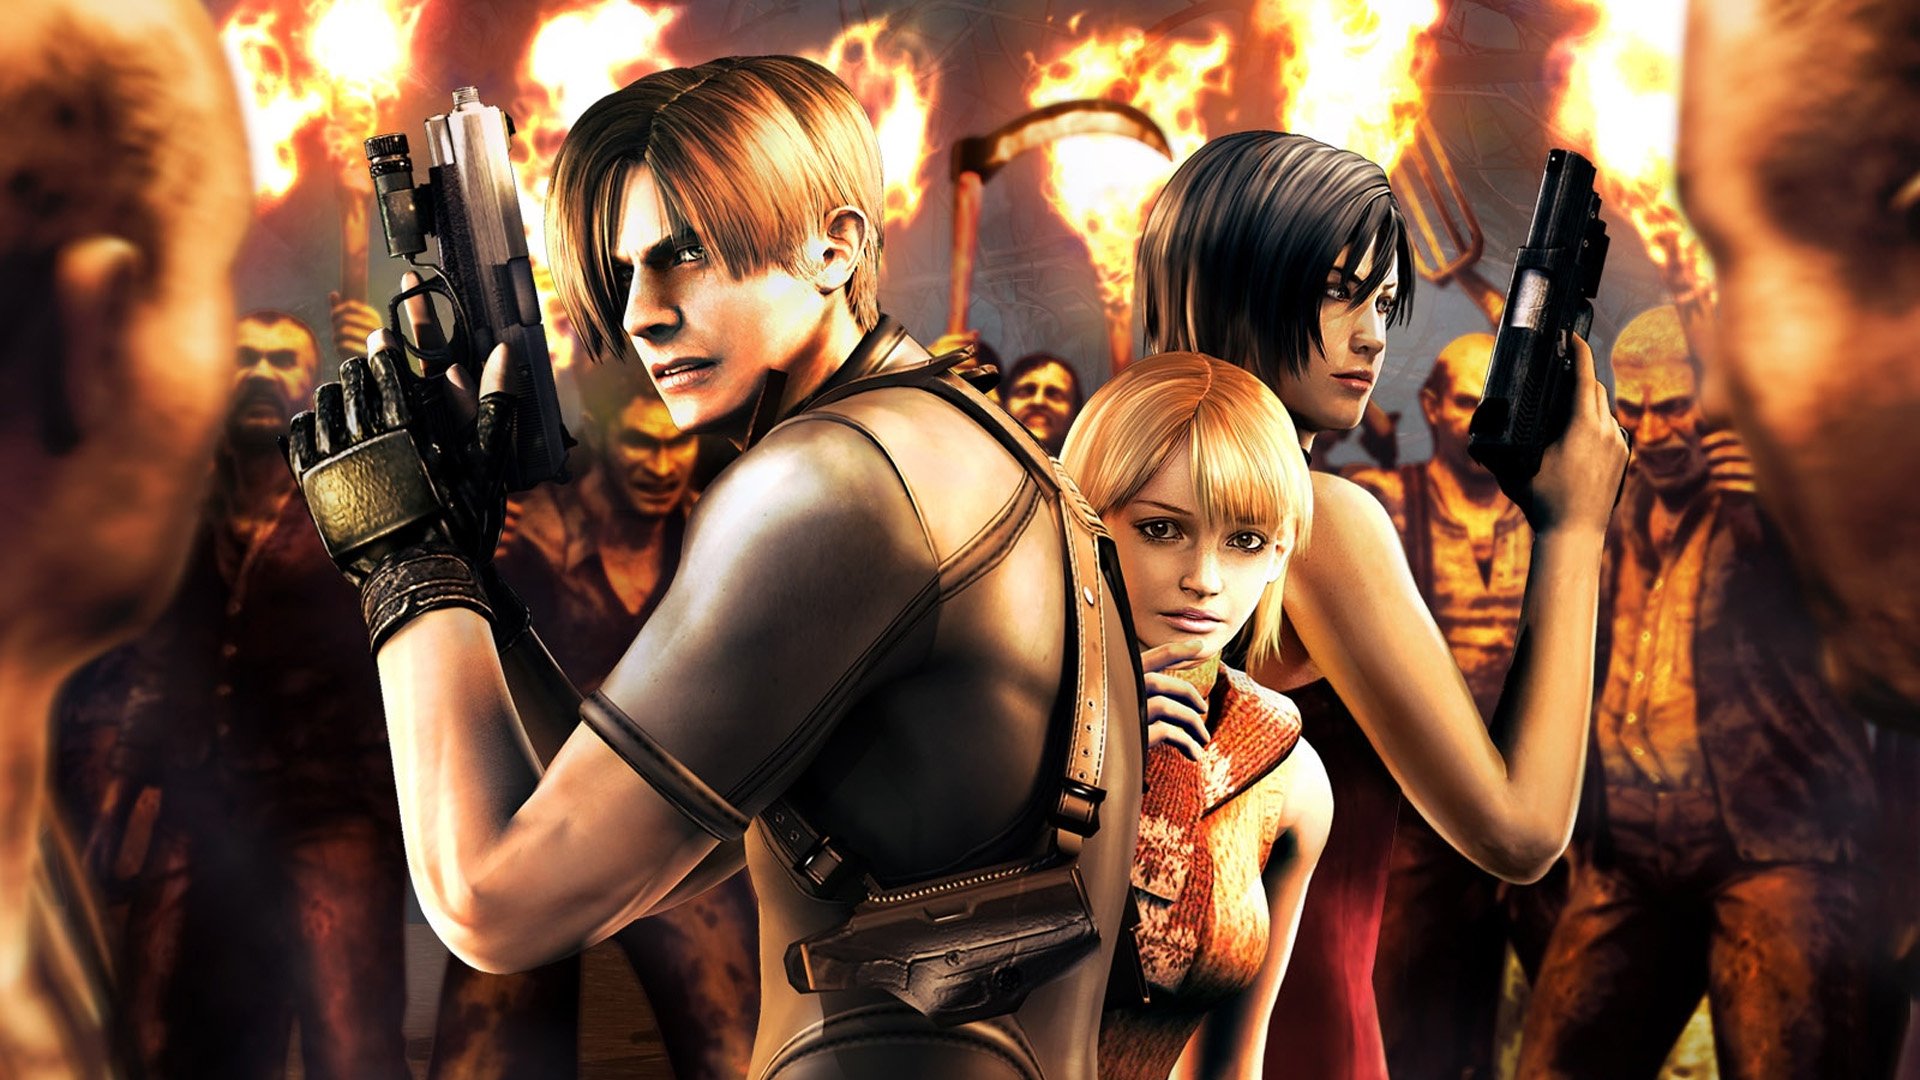 Sources: Capcom has overhauled its plans for a Resident Evil 4 remake | VGC